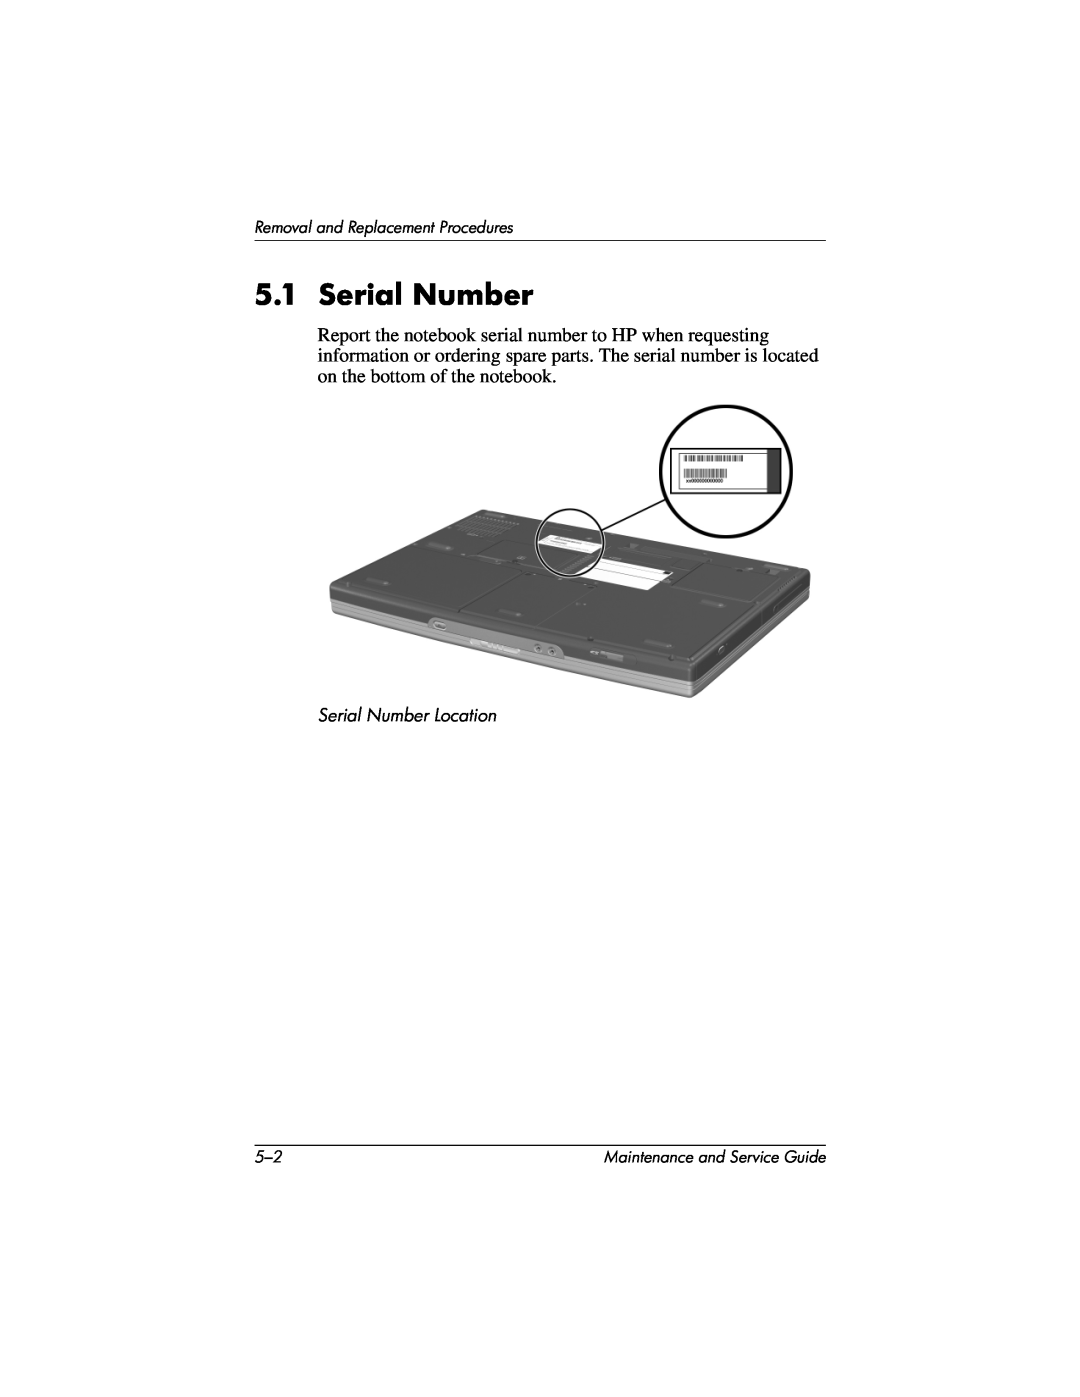 HP X1000, nx7000 manual Serial Number Location, Removal and Replacement Procedures, Maintenance and Service Guide 